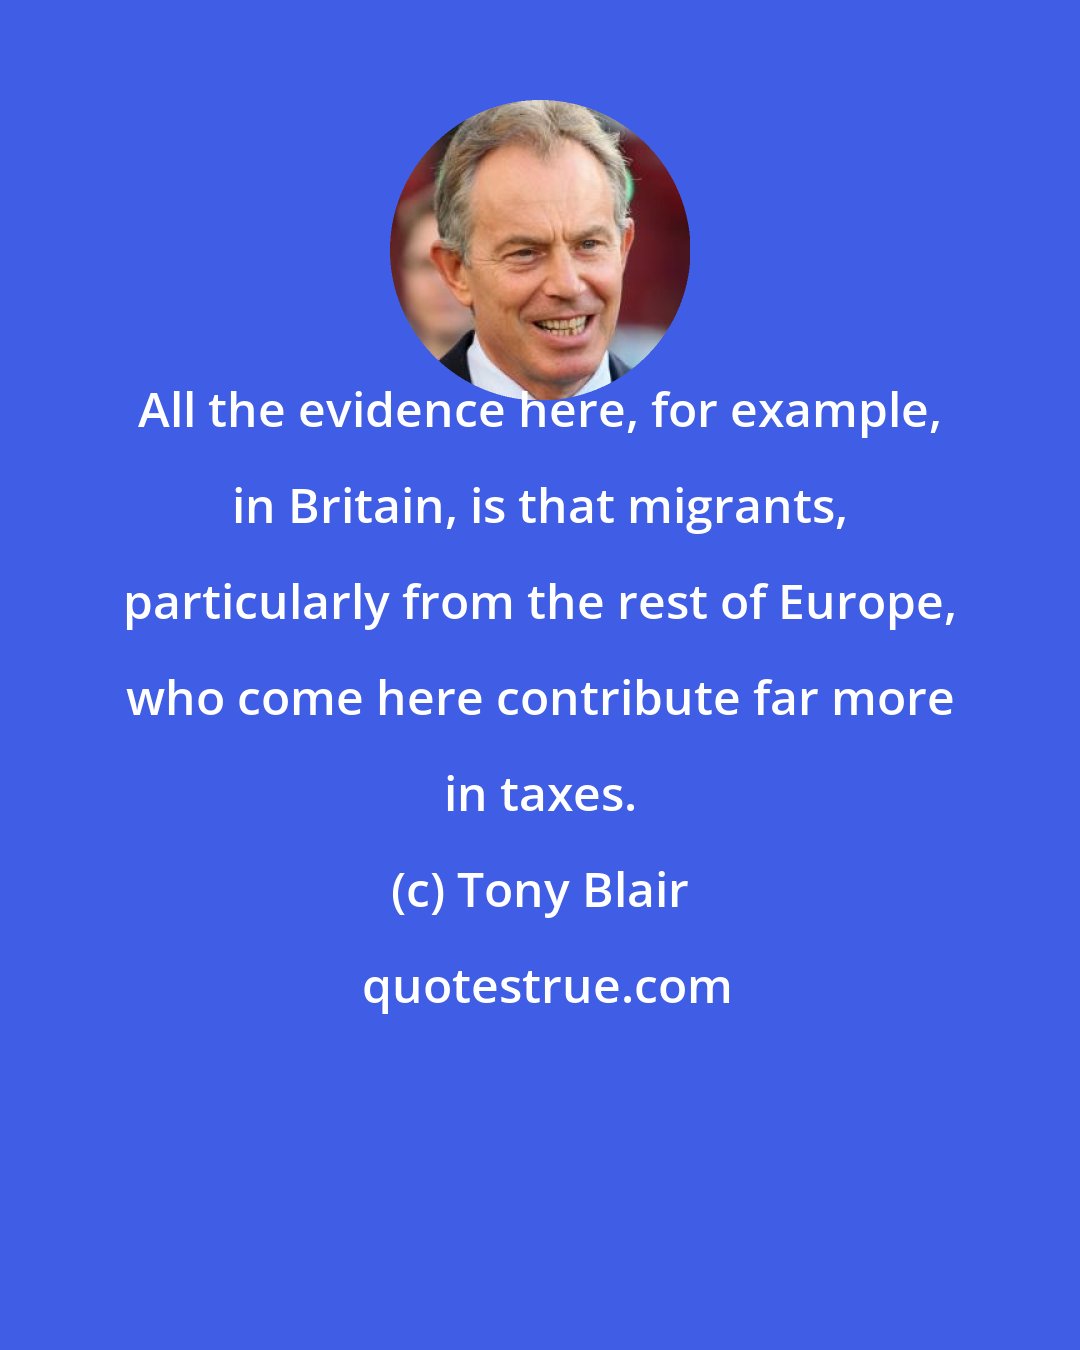 Tony Blair: All the evidence here, for example, in Britain, is that migrants, particularly from the rest of Europe, who come here contribute far more in taxes.